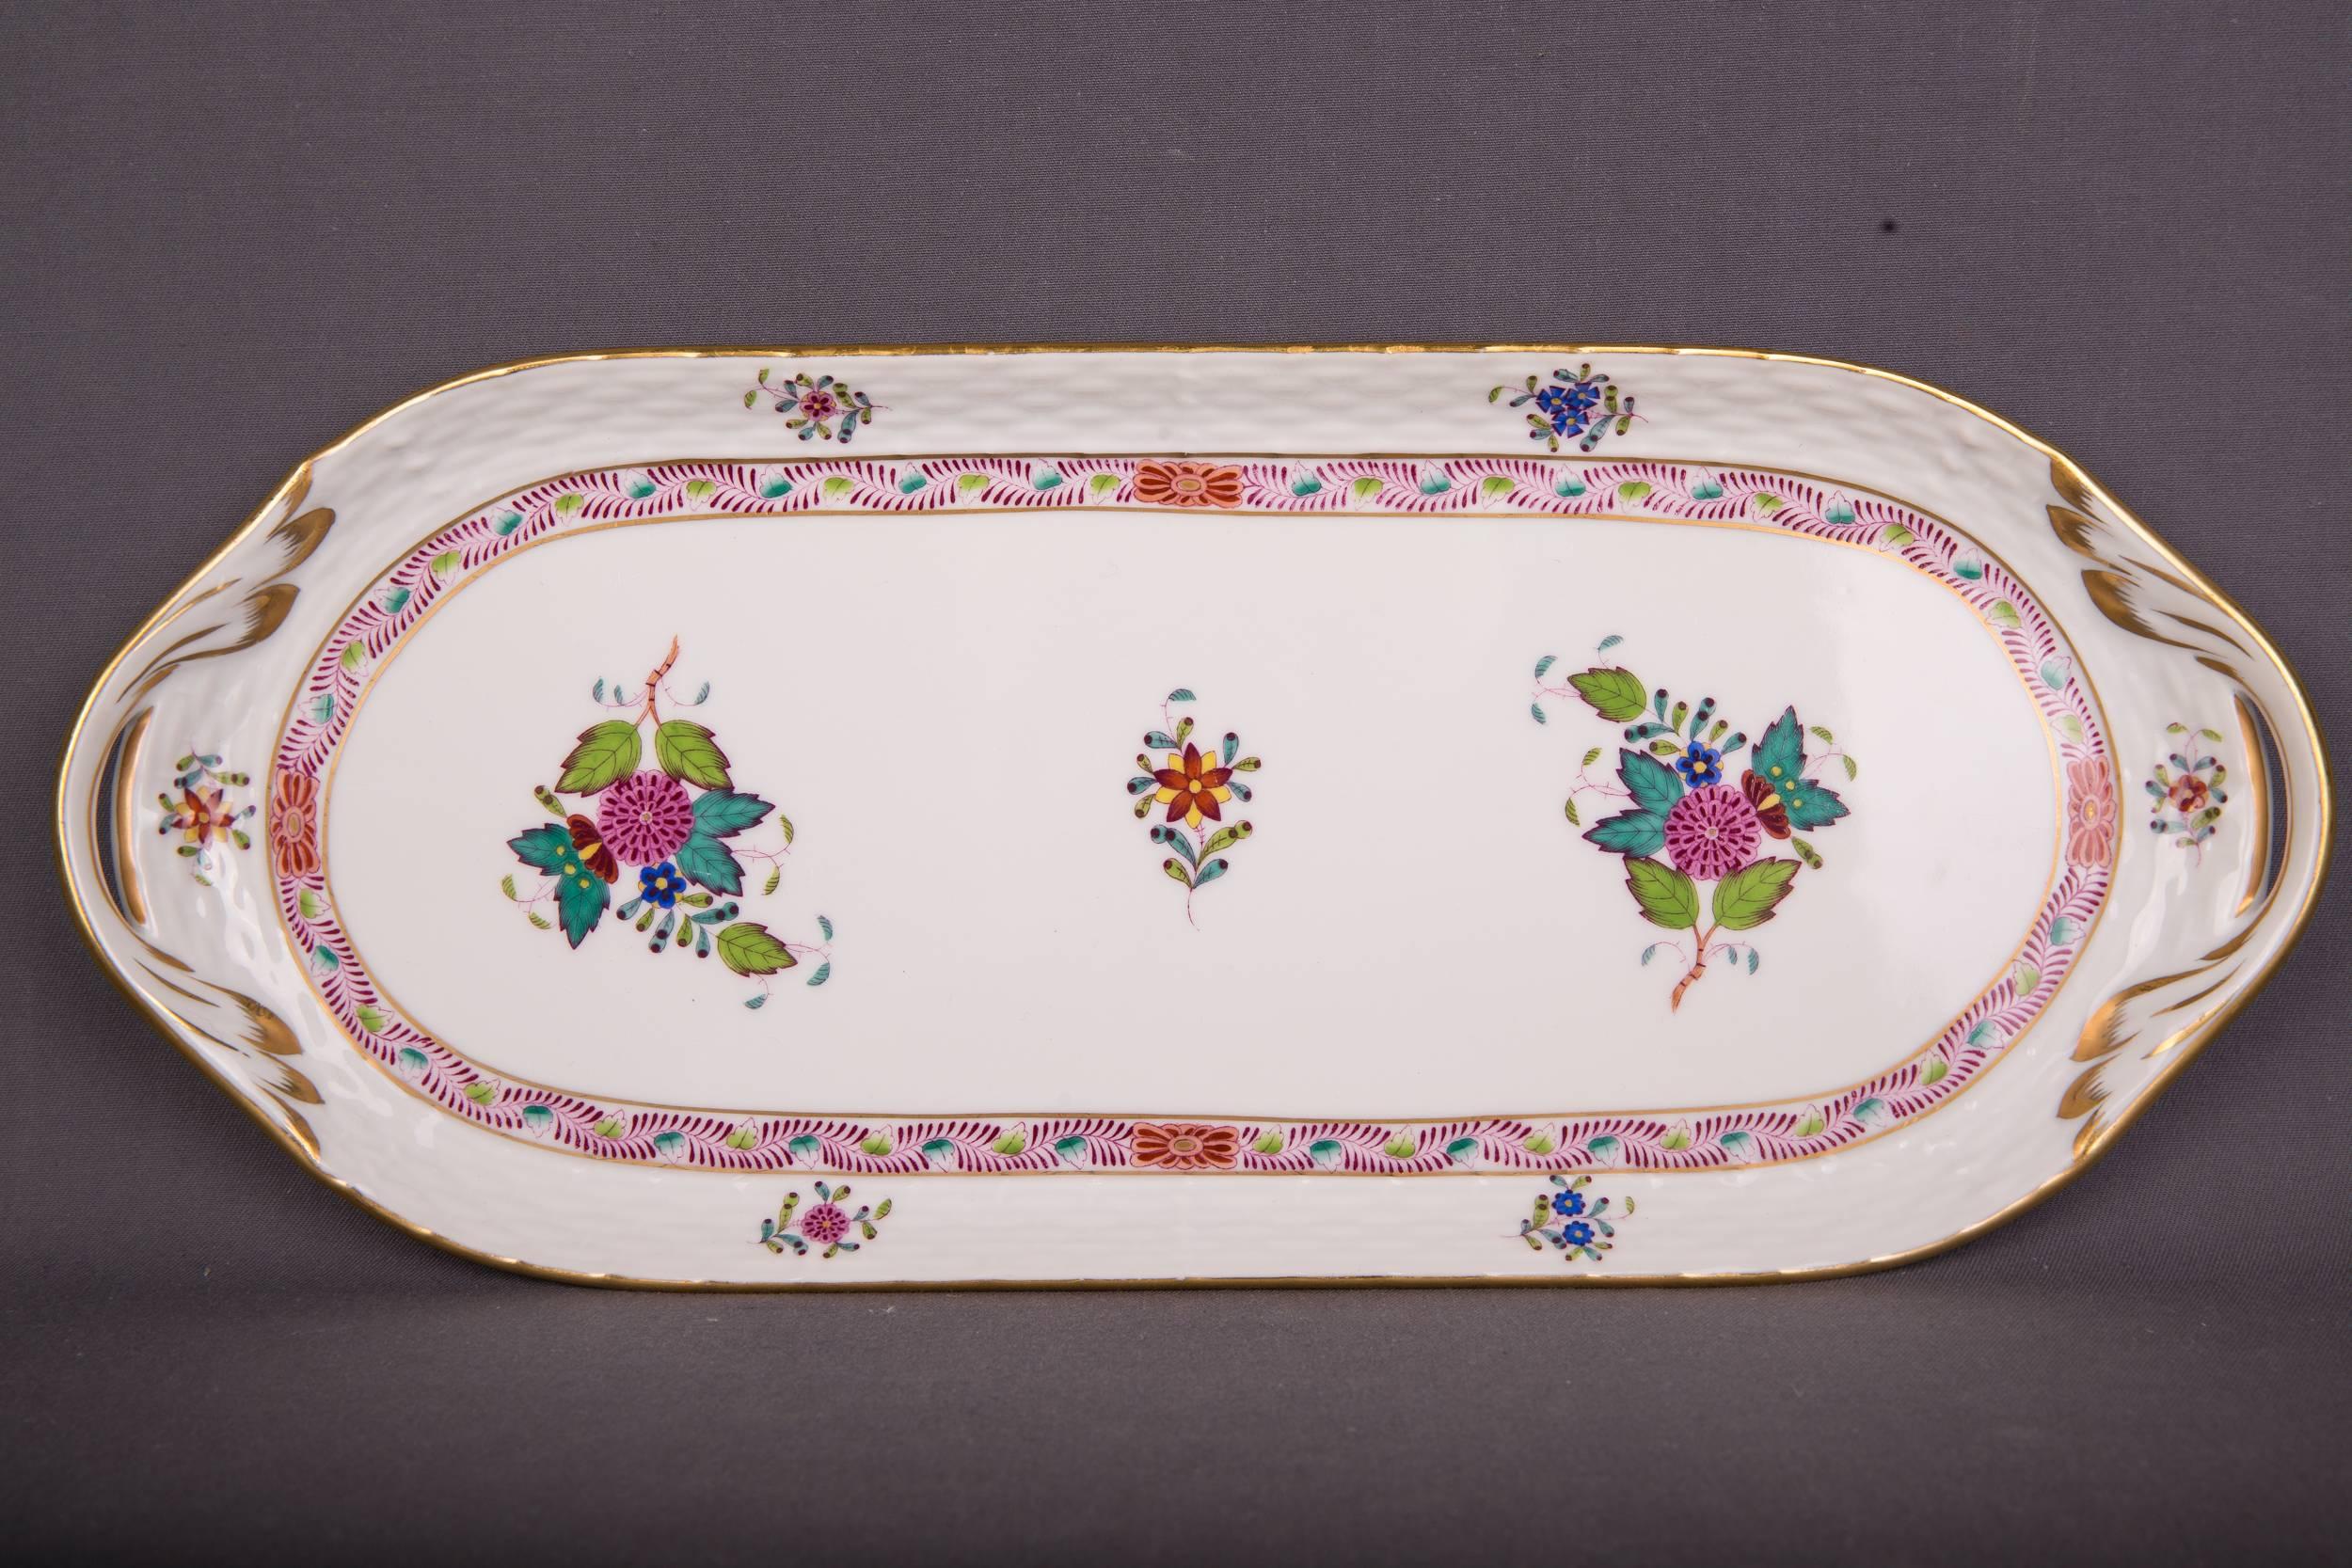 Extensive Rare Herend Dining Service Porcelain with a Lot of Flowers and Gold For Sale 3